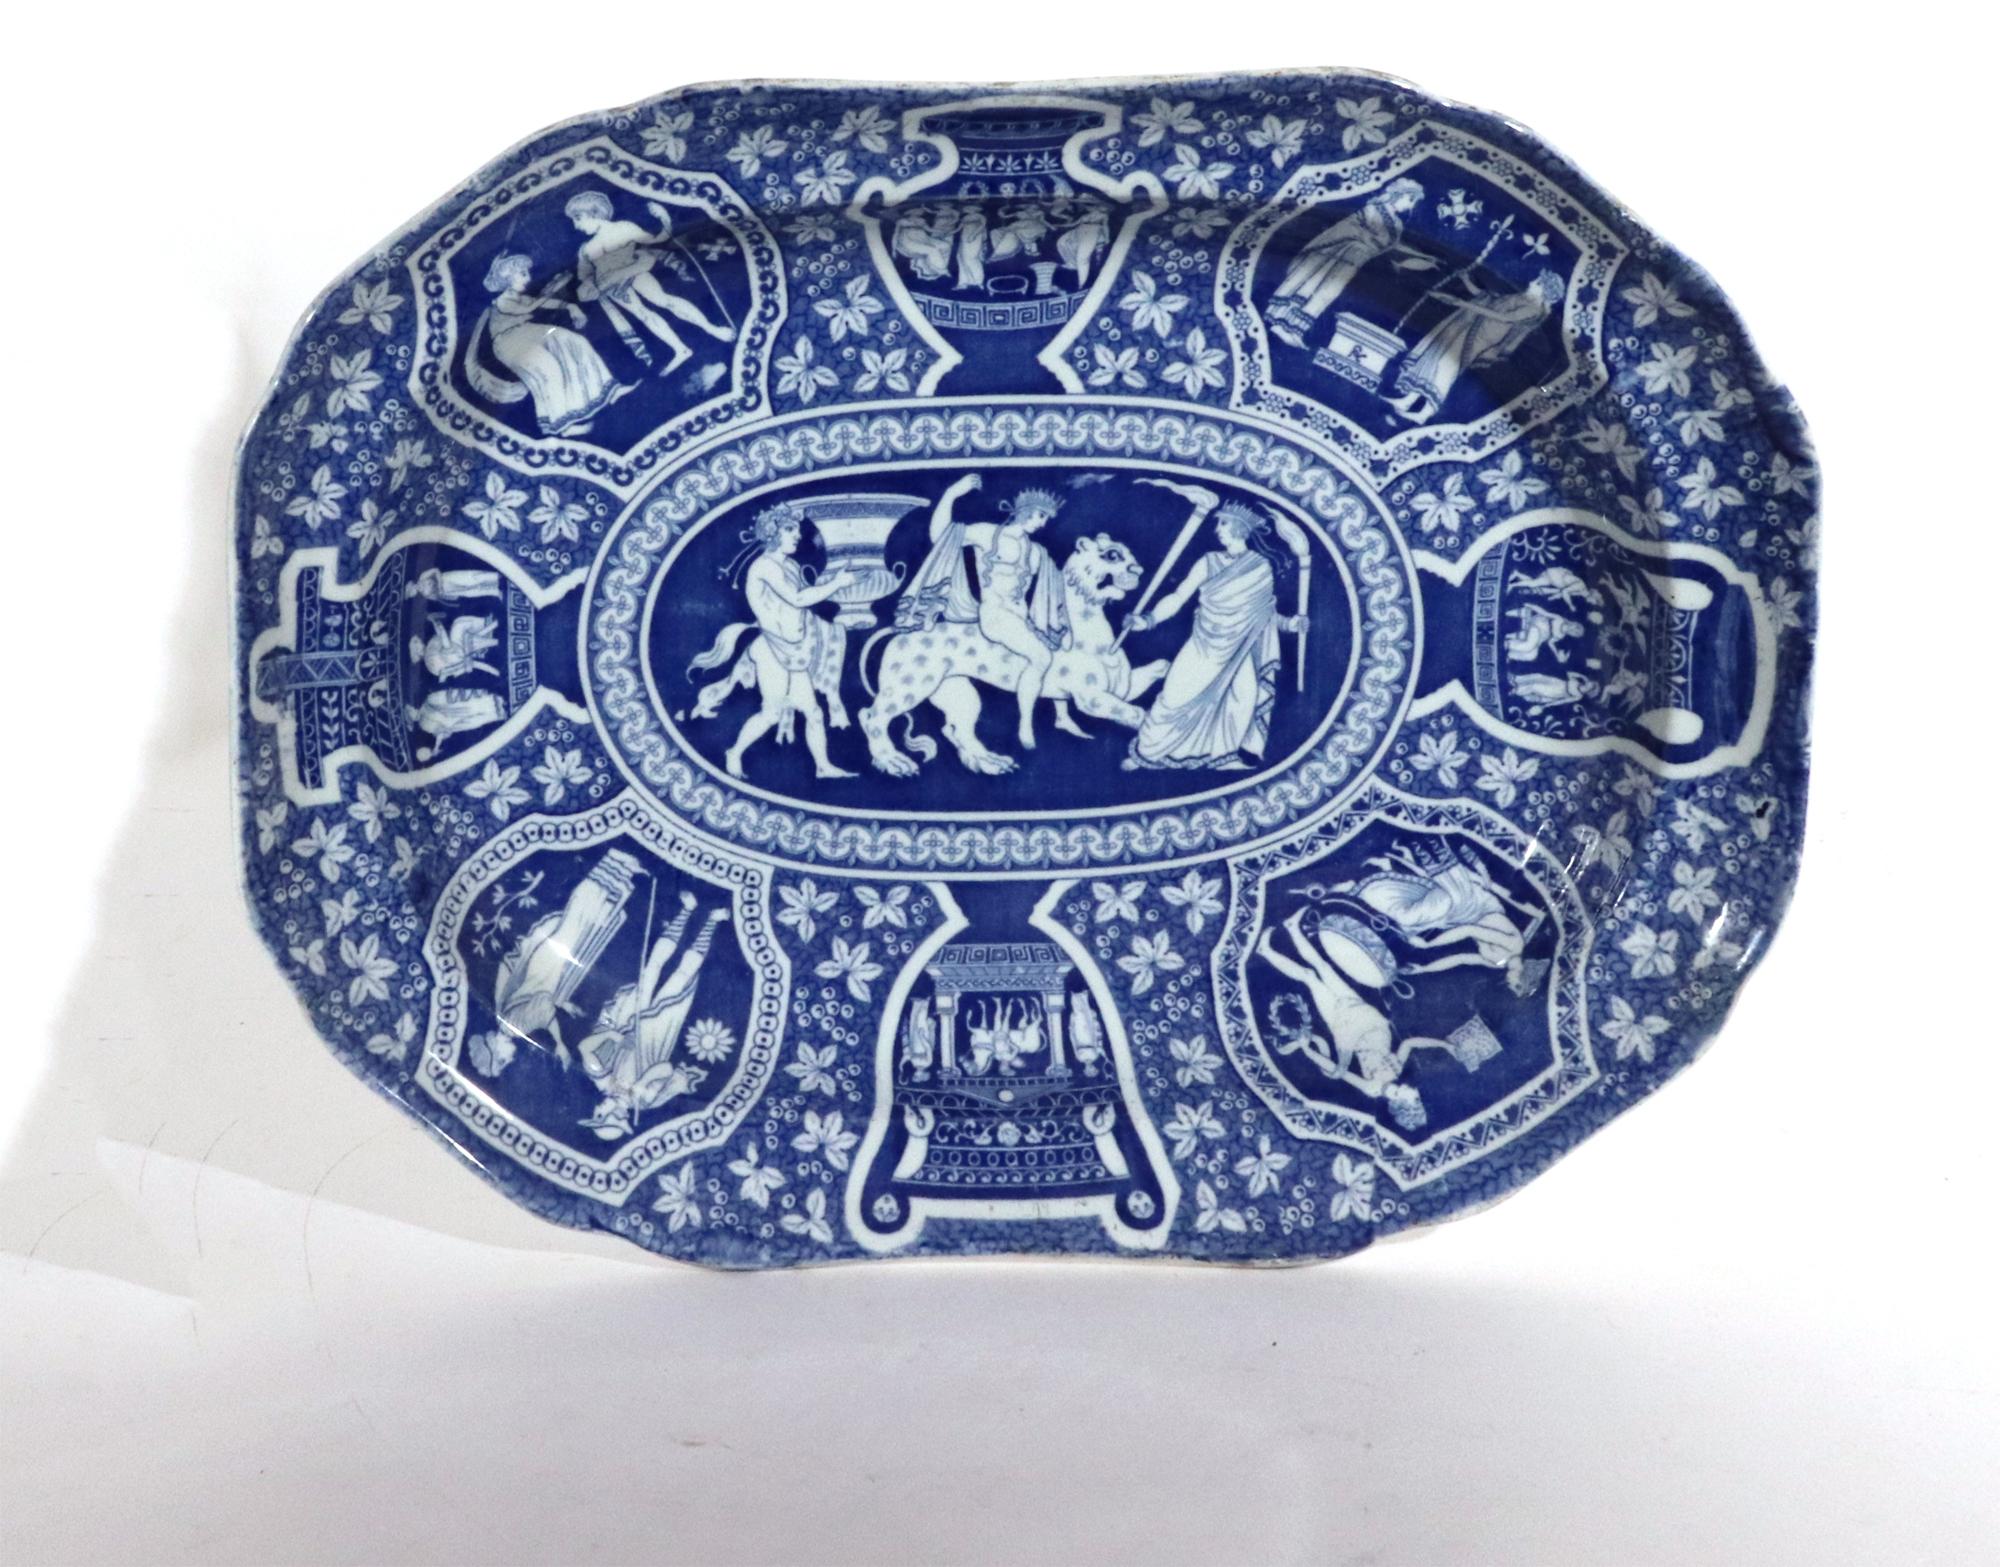 Spode pottery neo-classical Greek pattern blue deep dish,
Bacchus Mounted on a Panther,
Early-19th Century 

The Spode Greek pattern pottery shaped rectangular dish with cantered corners is printed in blue with neo-classical scenes on panels and